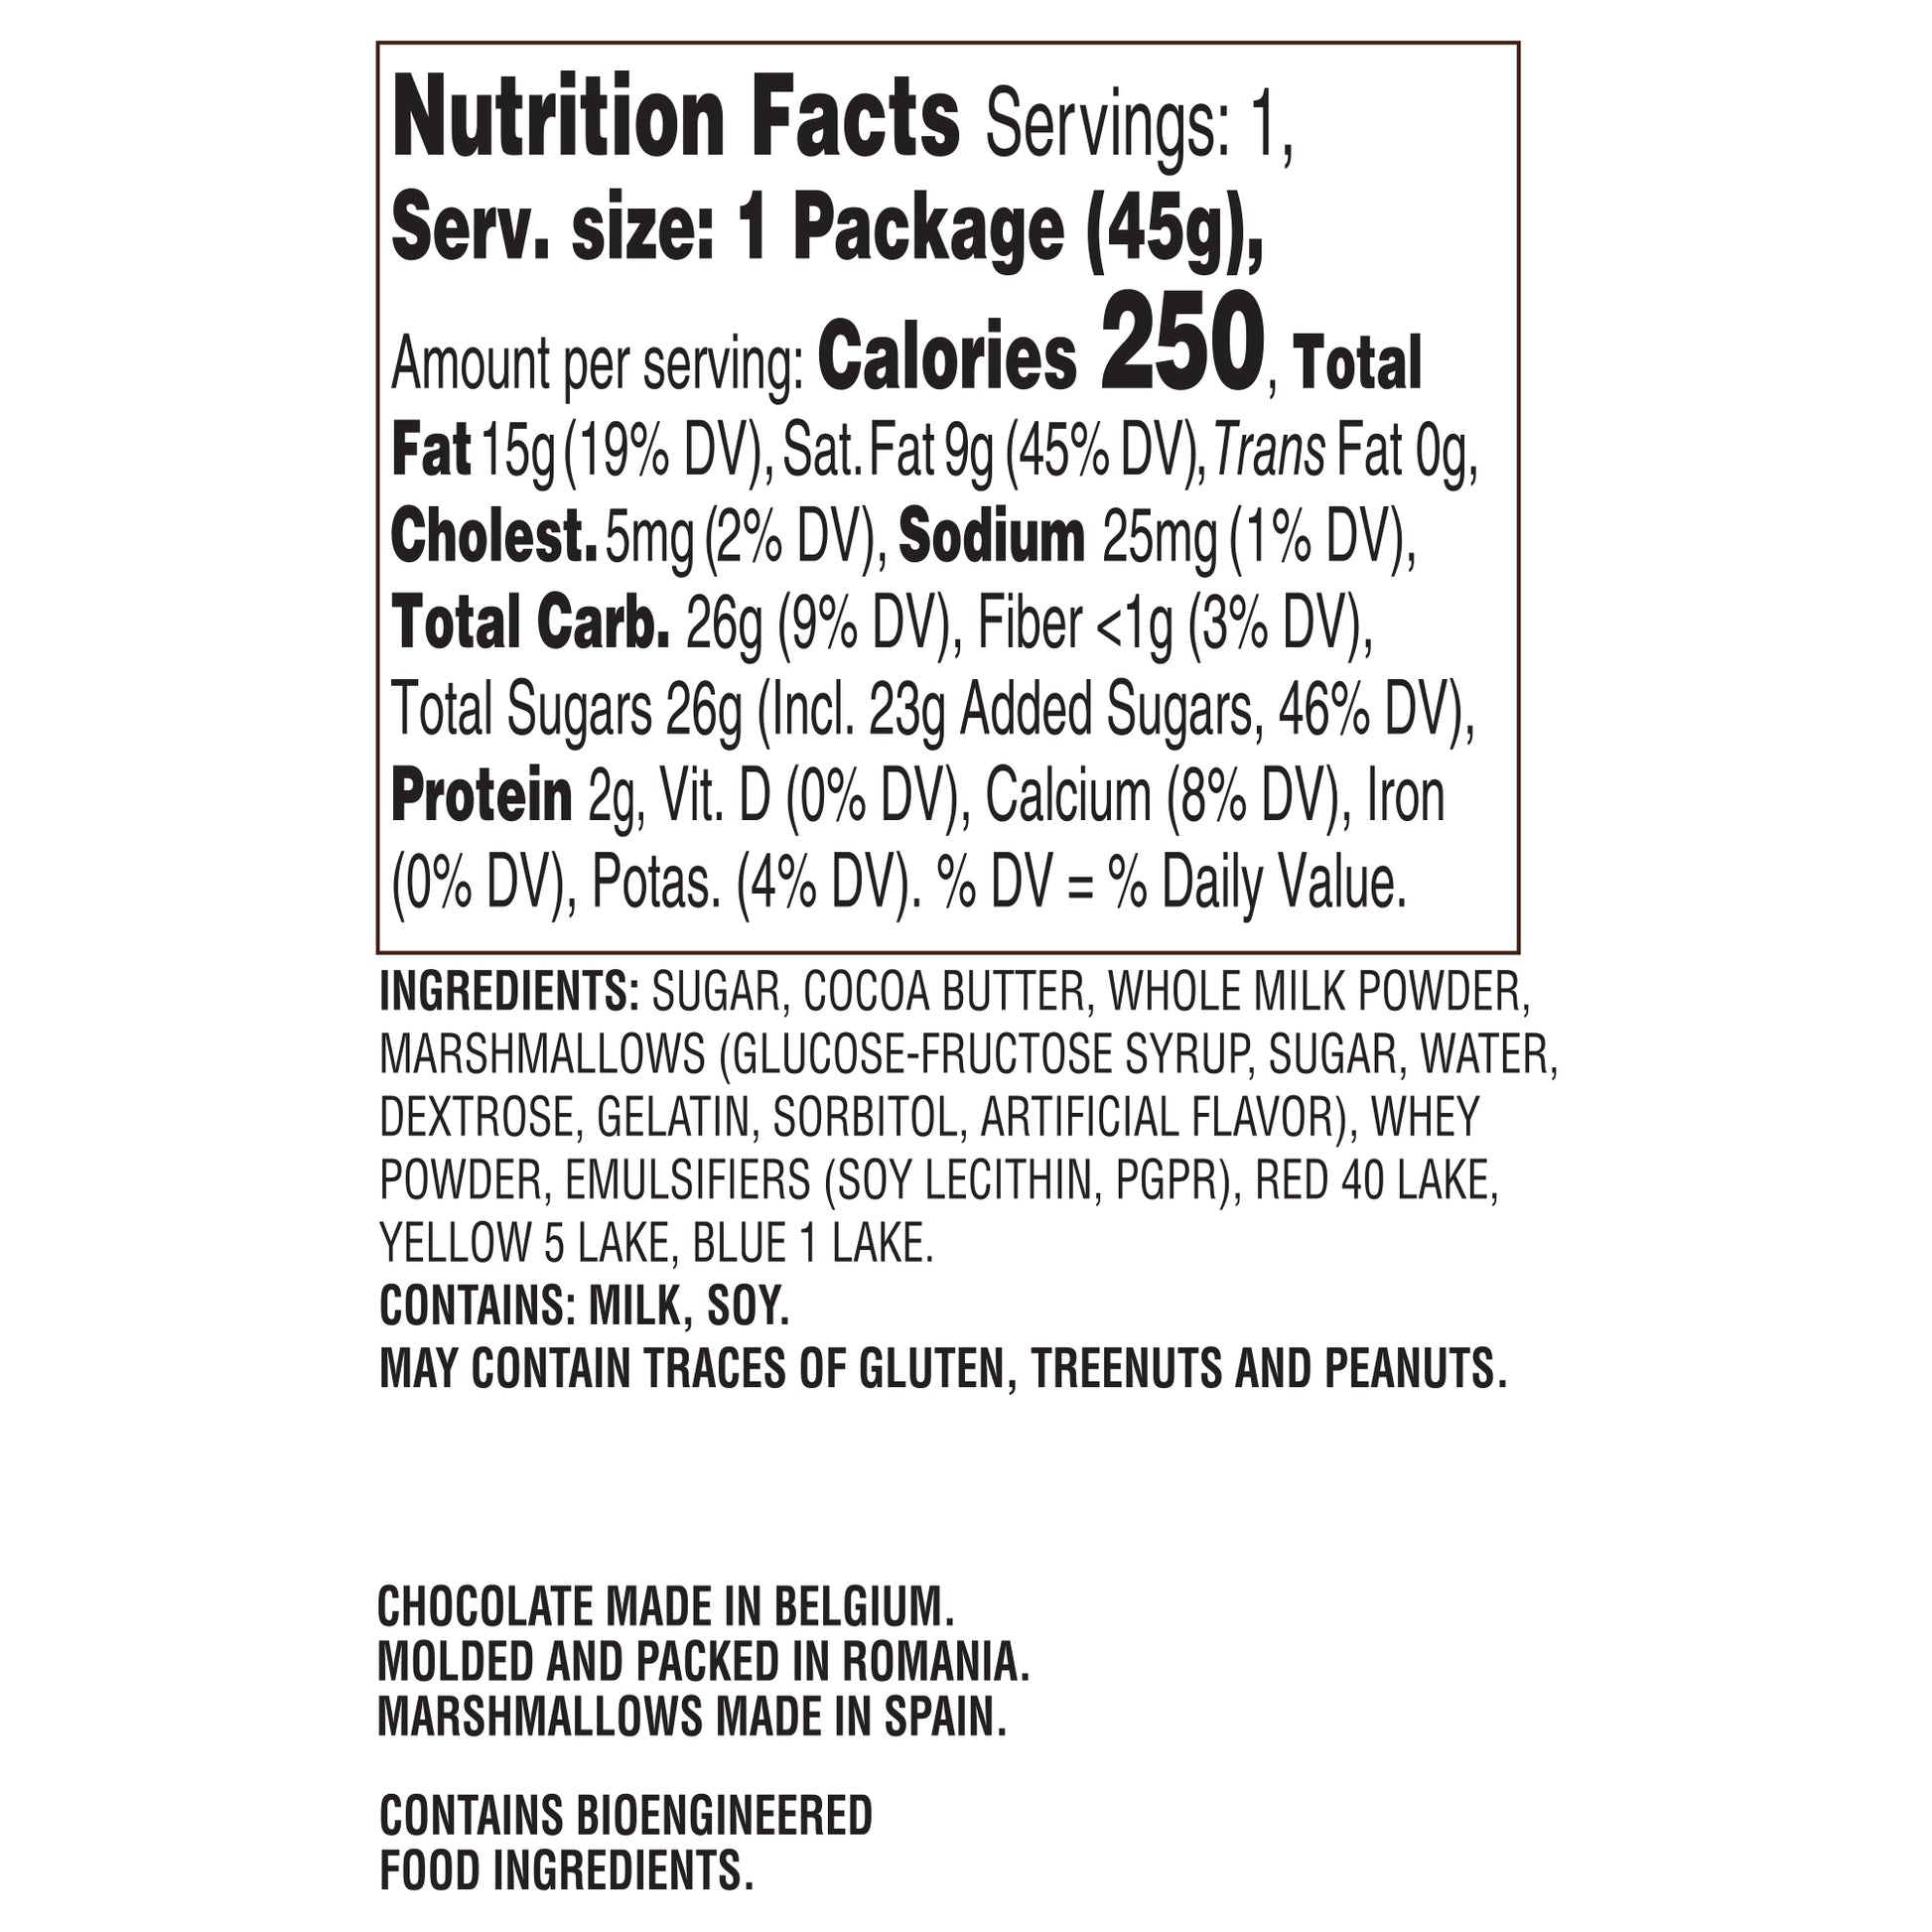 snowman nutrition facts and ingredients